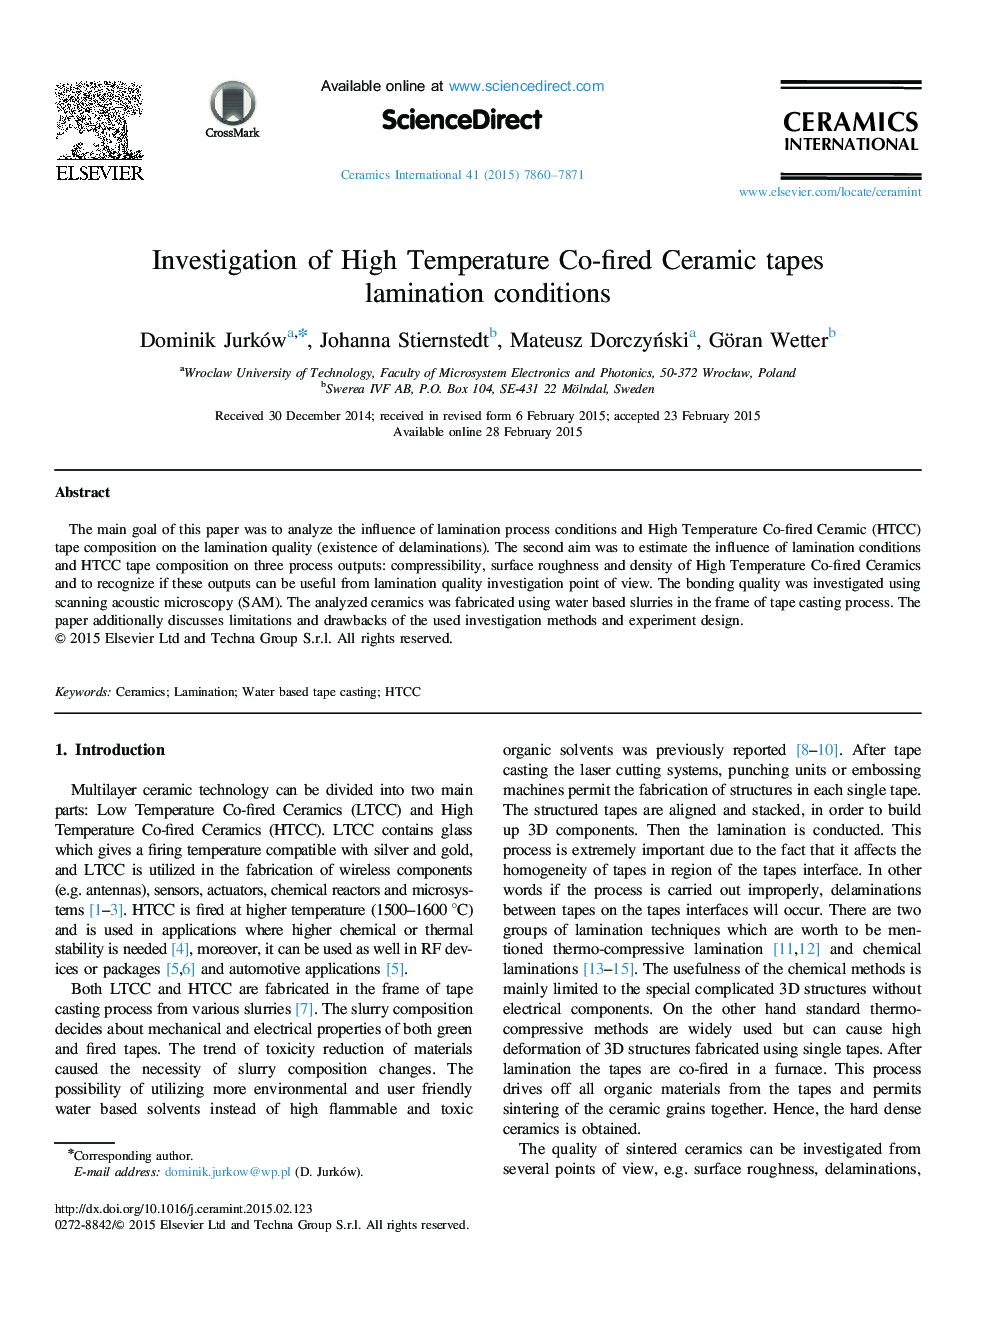 Investigation of High Temperature Co-fired Ceramic tapes lamination conditions